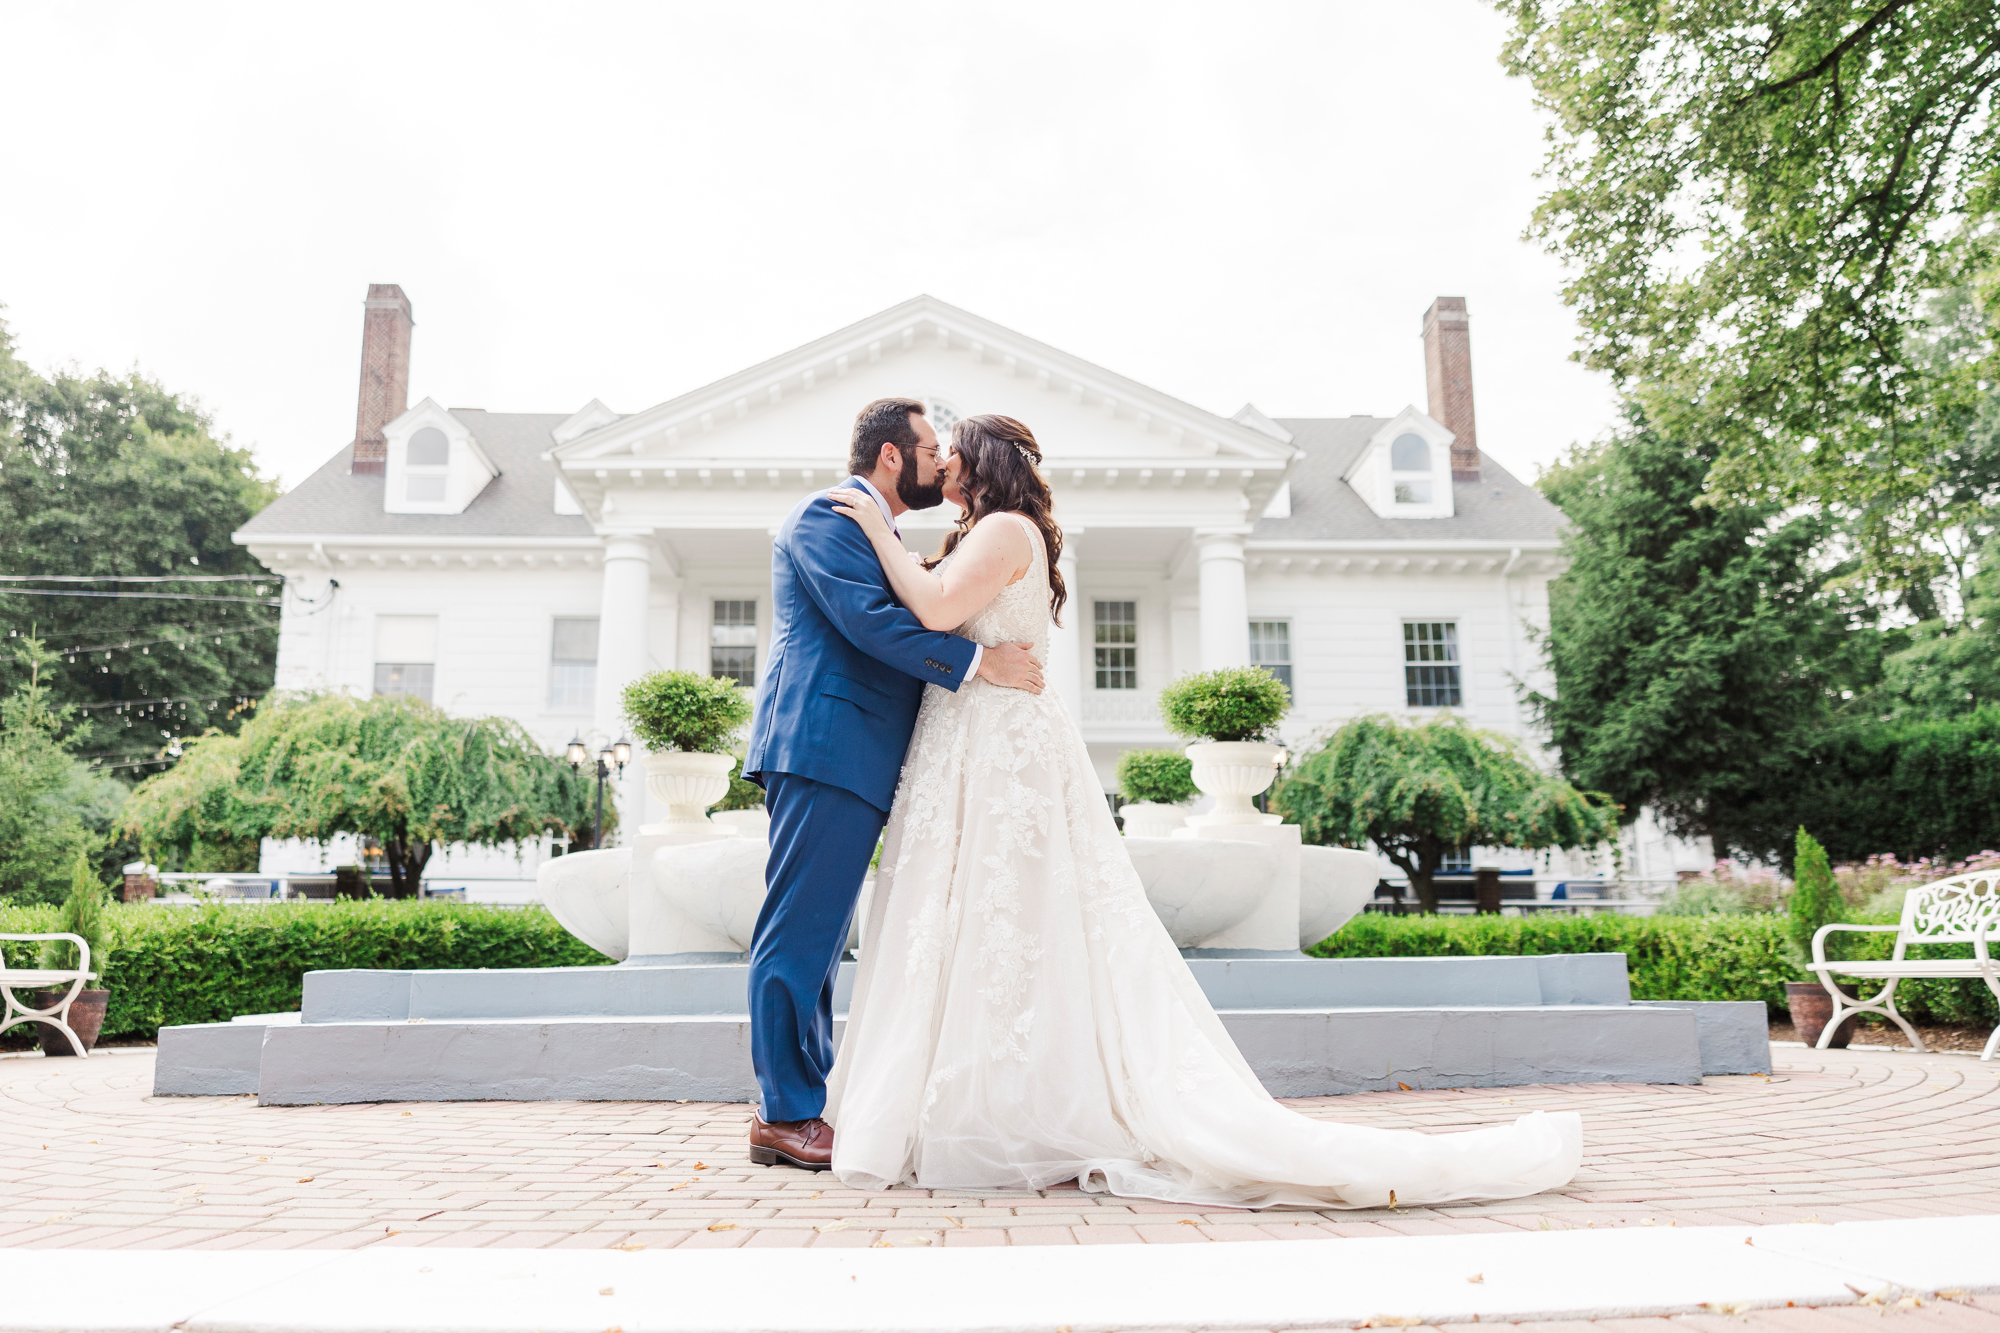 Breathtaking Wedding at Briarcliff Manor in New York